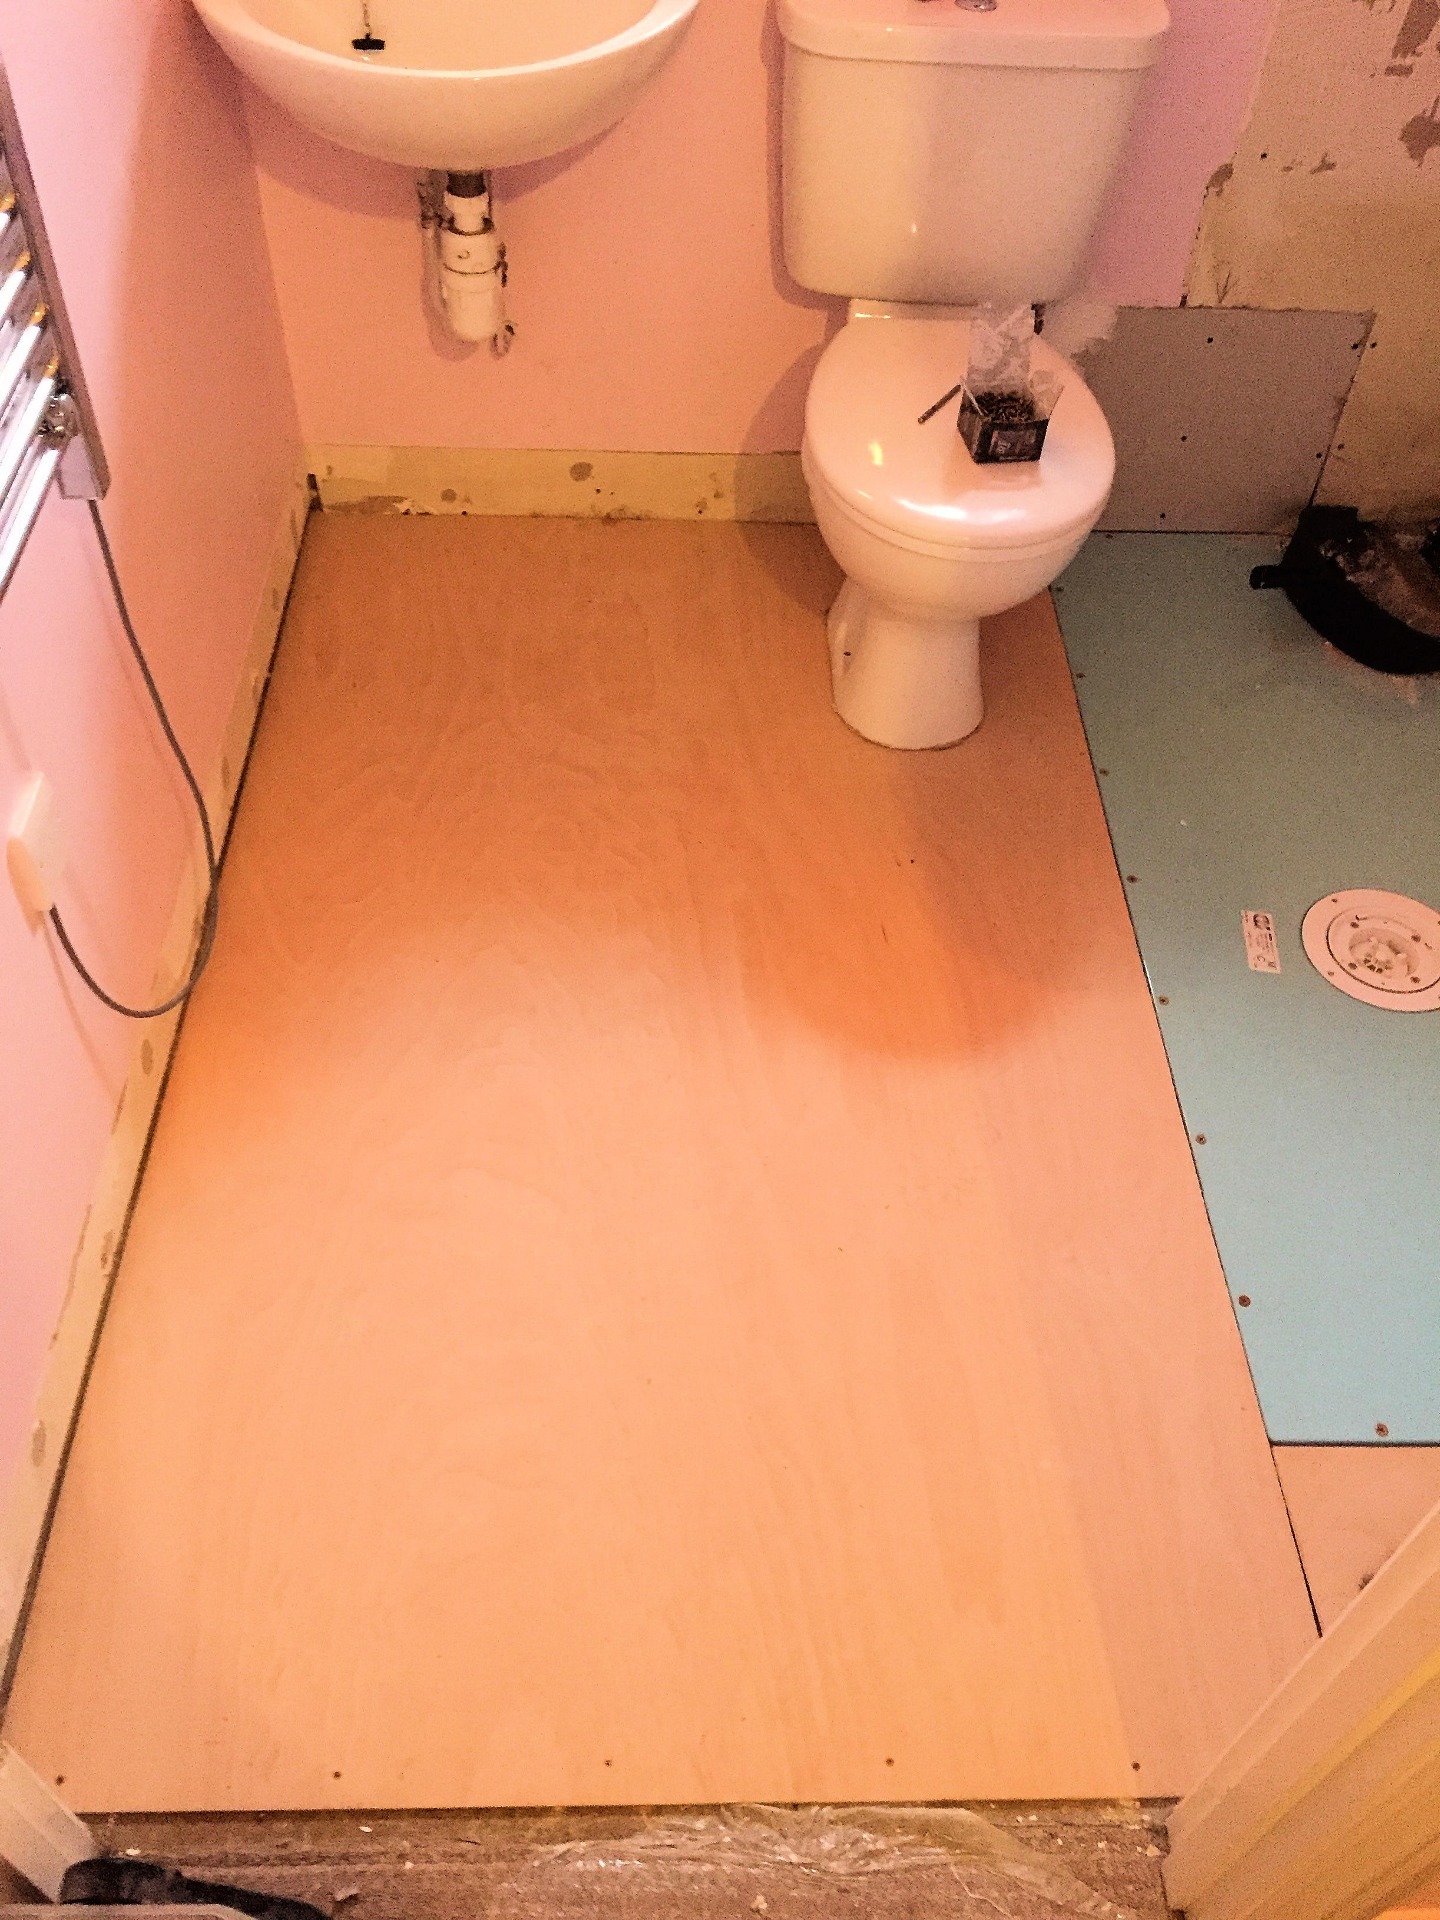 Complete bathroom floor to wet room make waterproof allows easy access and easier washing facilities with out worry of splashes and spills.